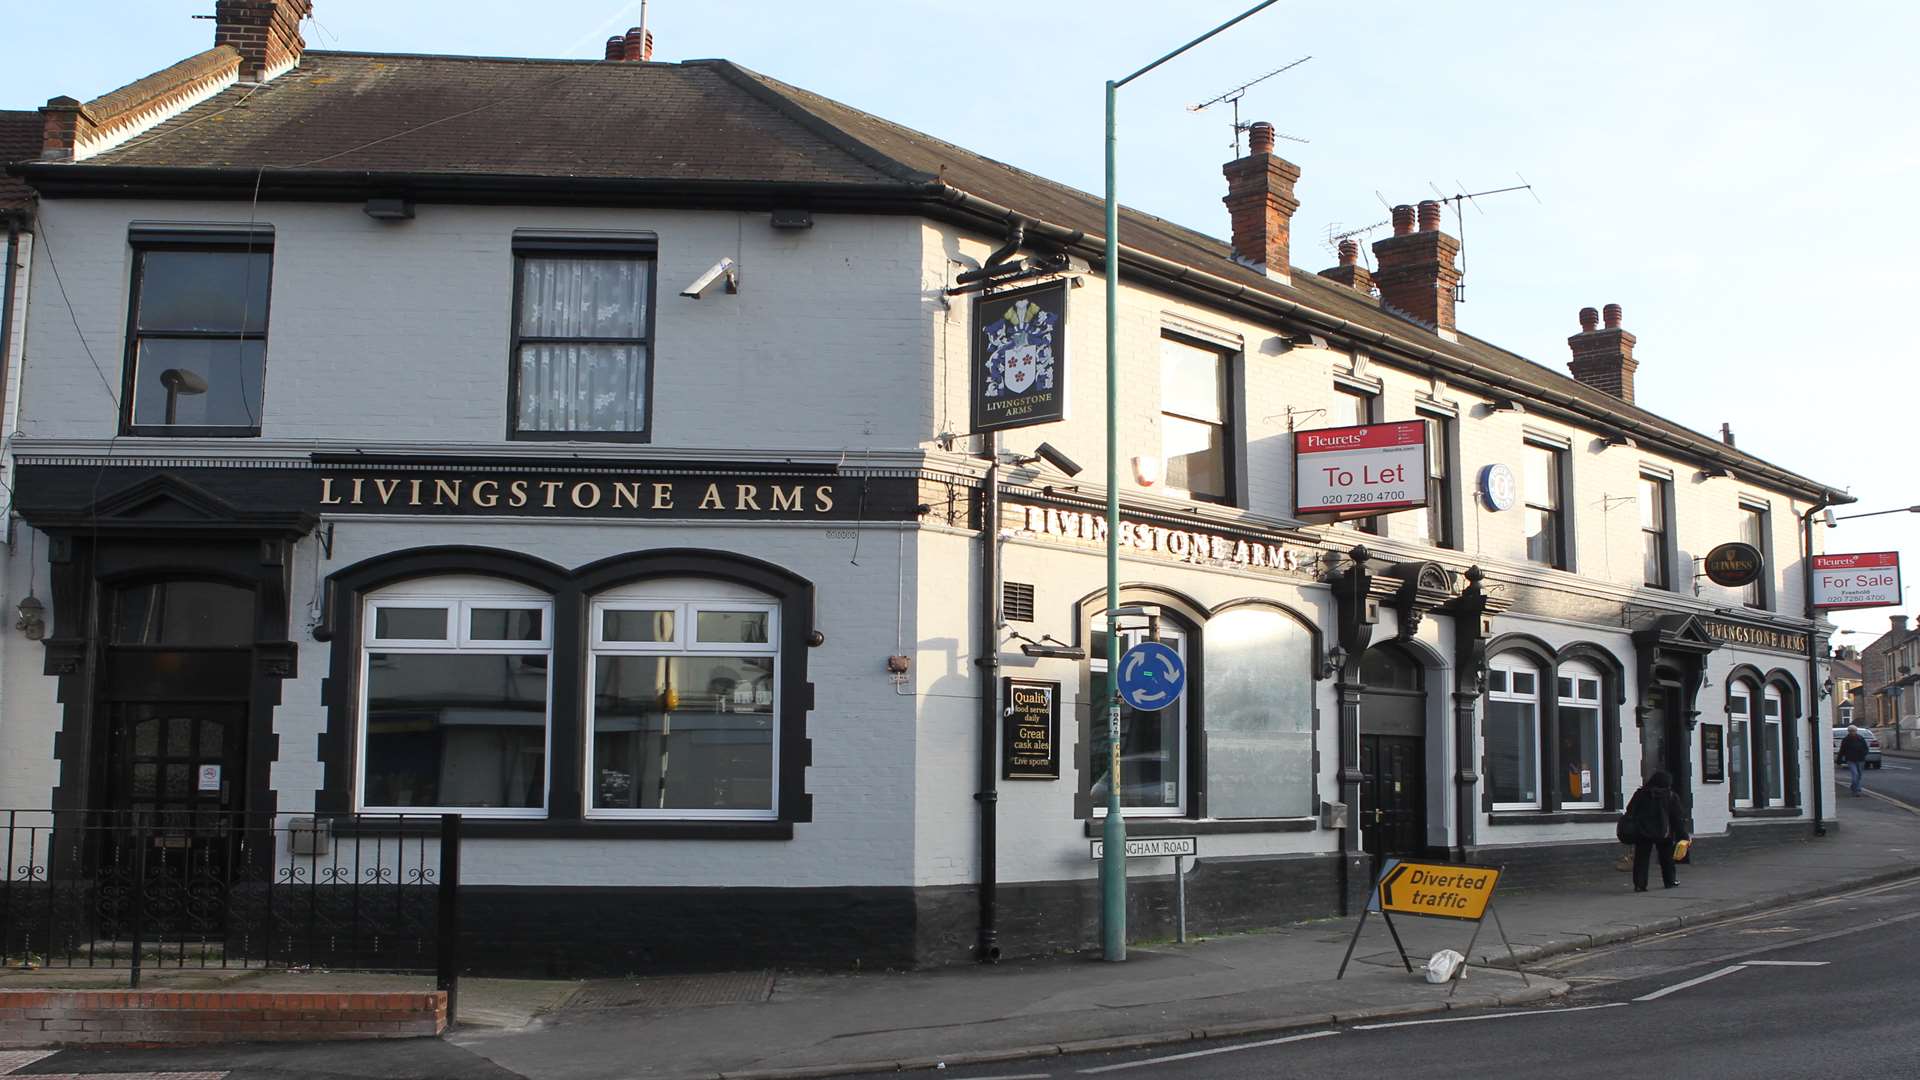 The Livingstone Arms pub, 239 Gillingham Road was up for sale